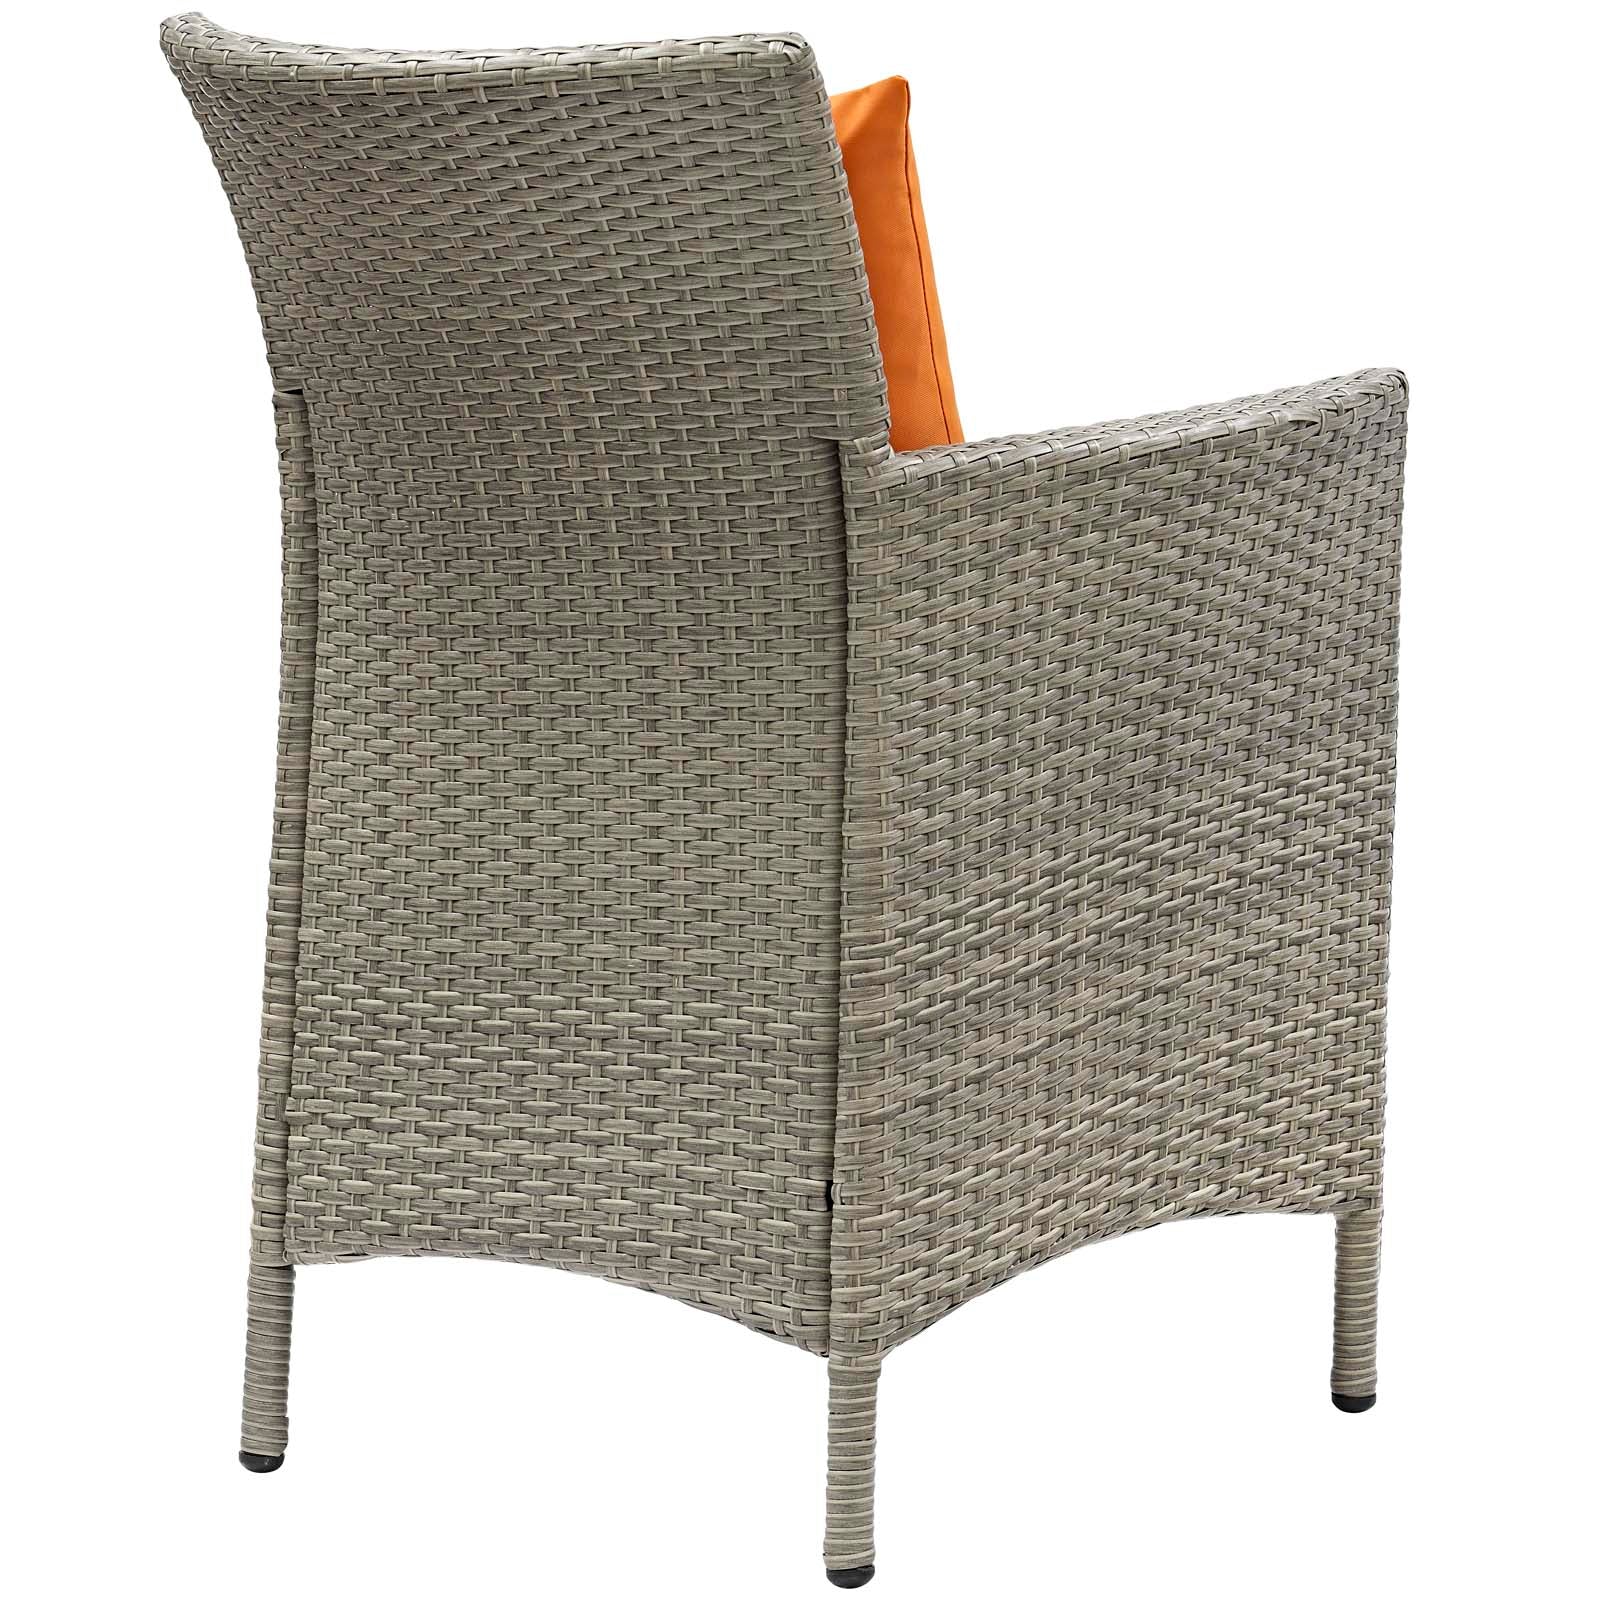 Modway Outdoor Dining Chairs - Conduit Outdoor Patio Wicker Rattan Dining Armchair Light Gray Orange